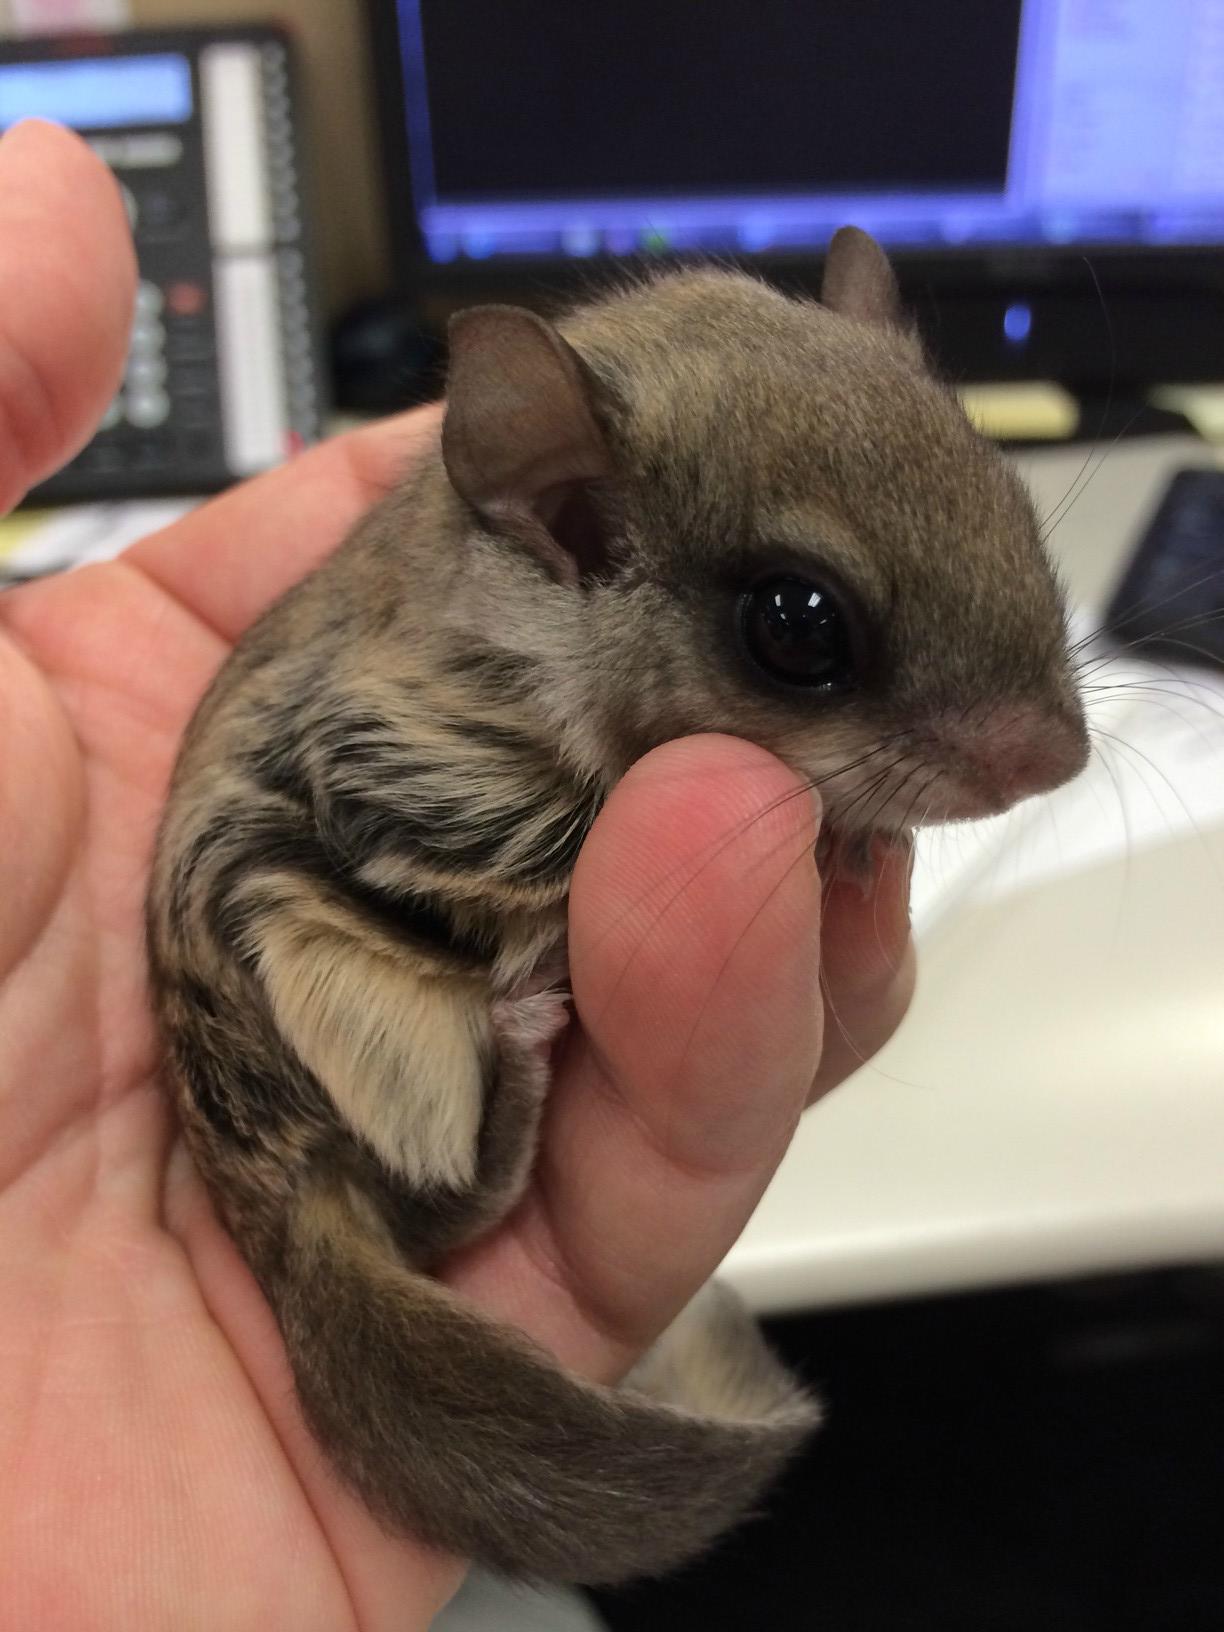 Biscuits grew up to be a beautiful squirrel. Just look how cute she is! | Animals Zone